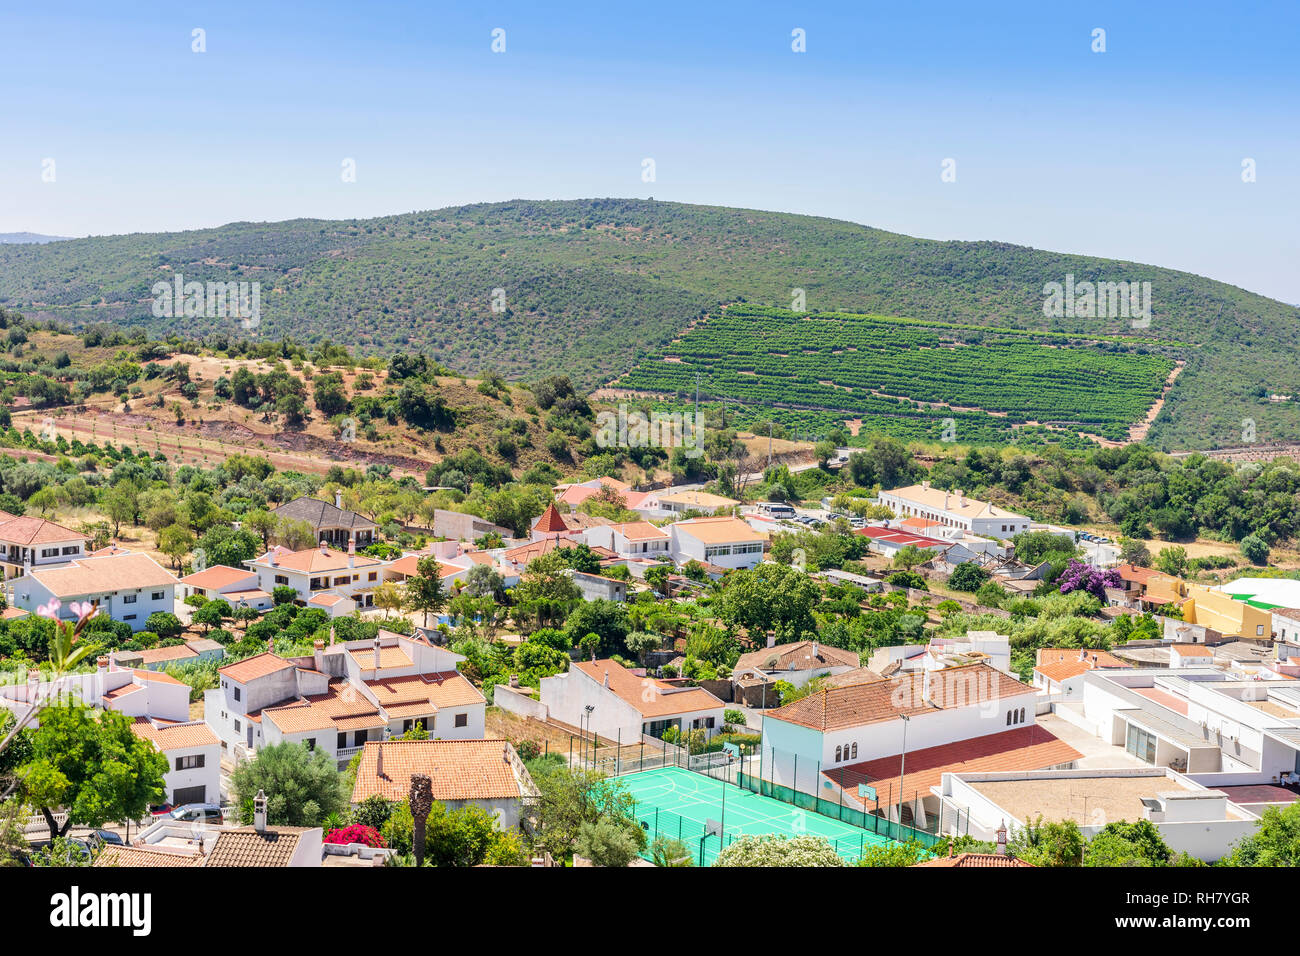 Picturesque Alte cityscape, little town located in hills of Algarve, Portugal Stock Photo